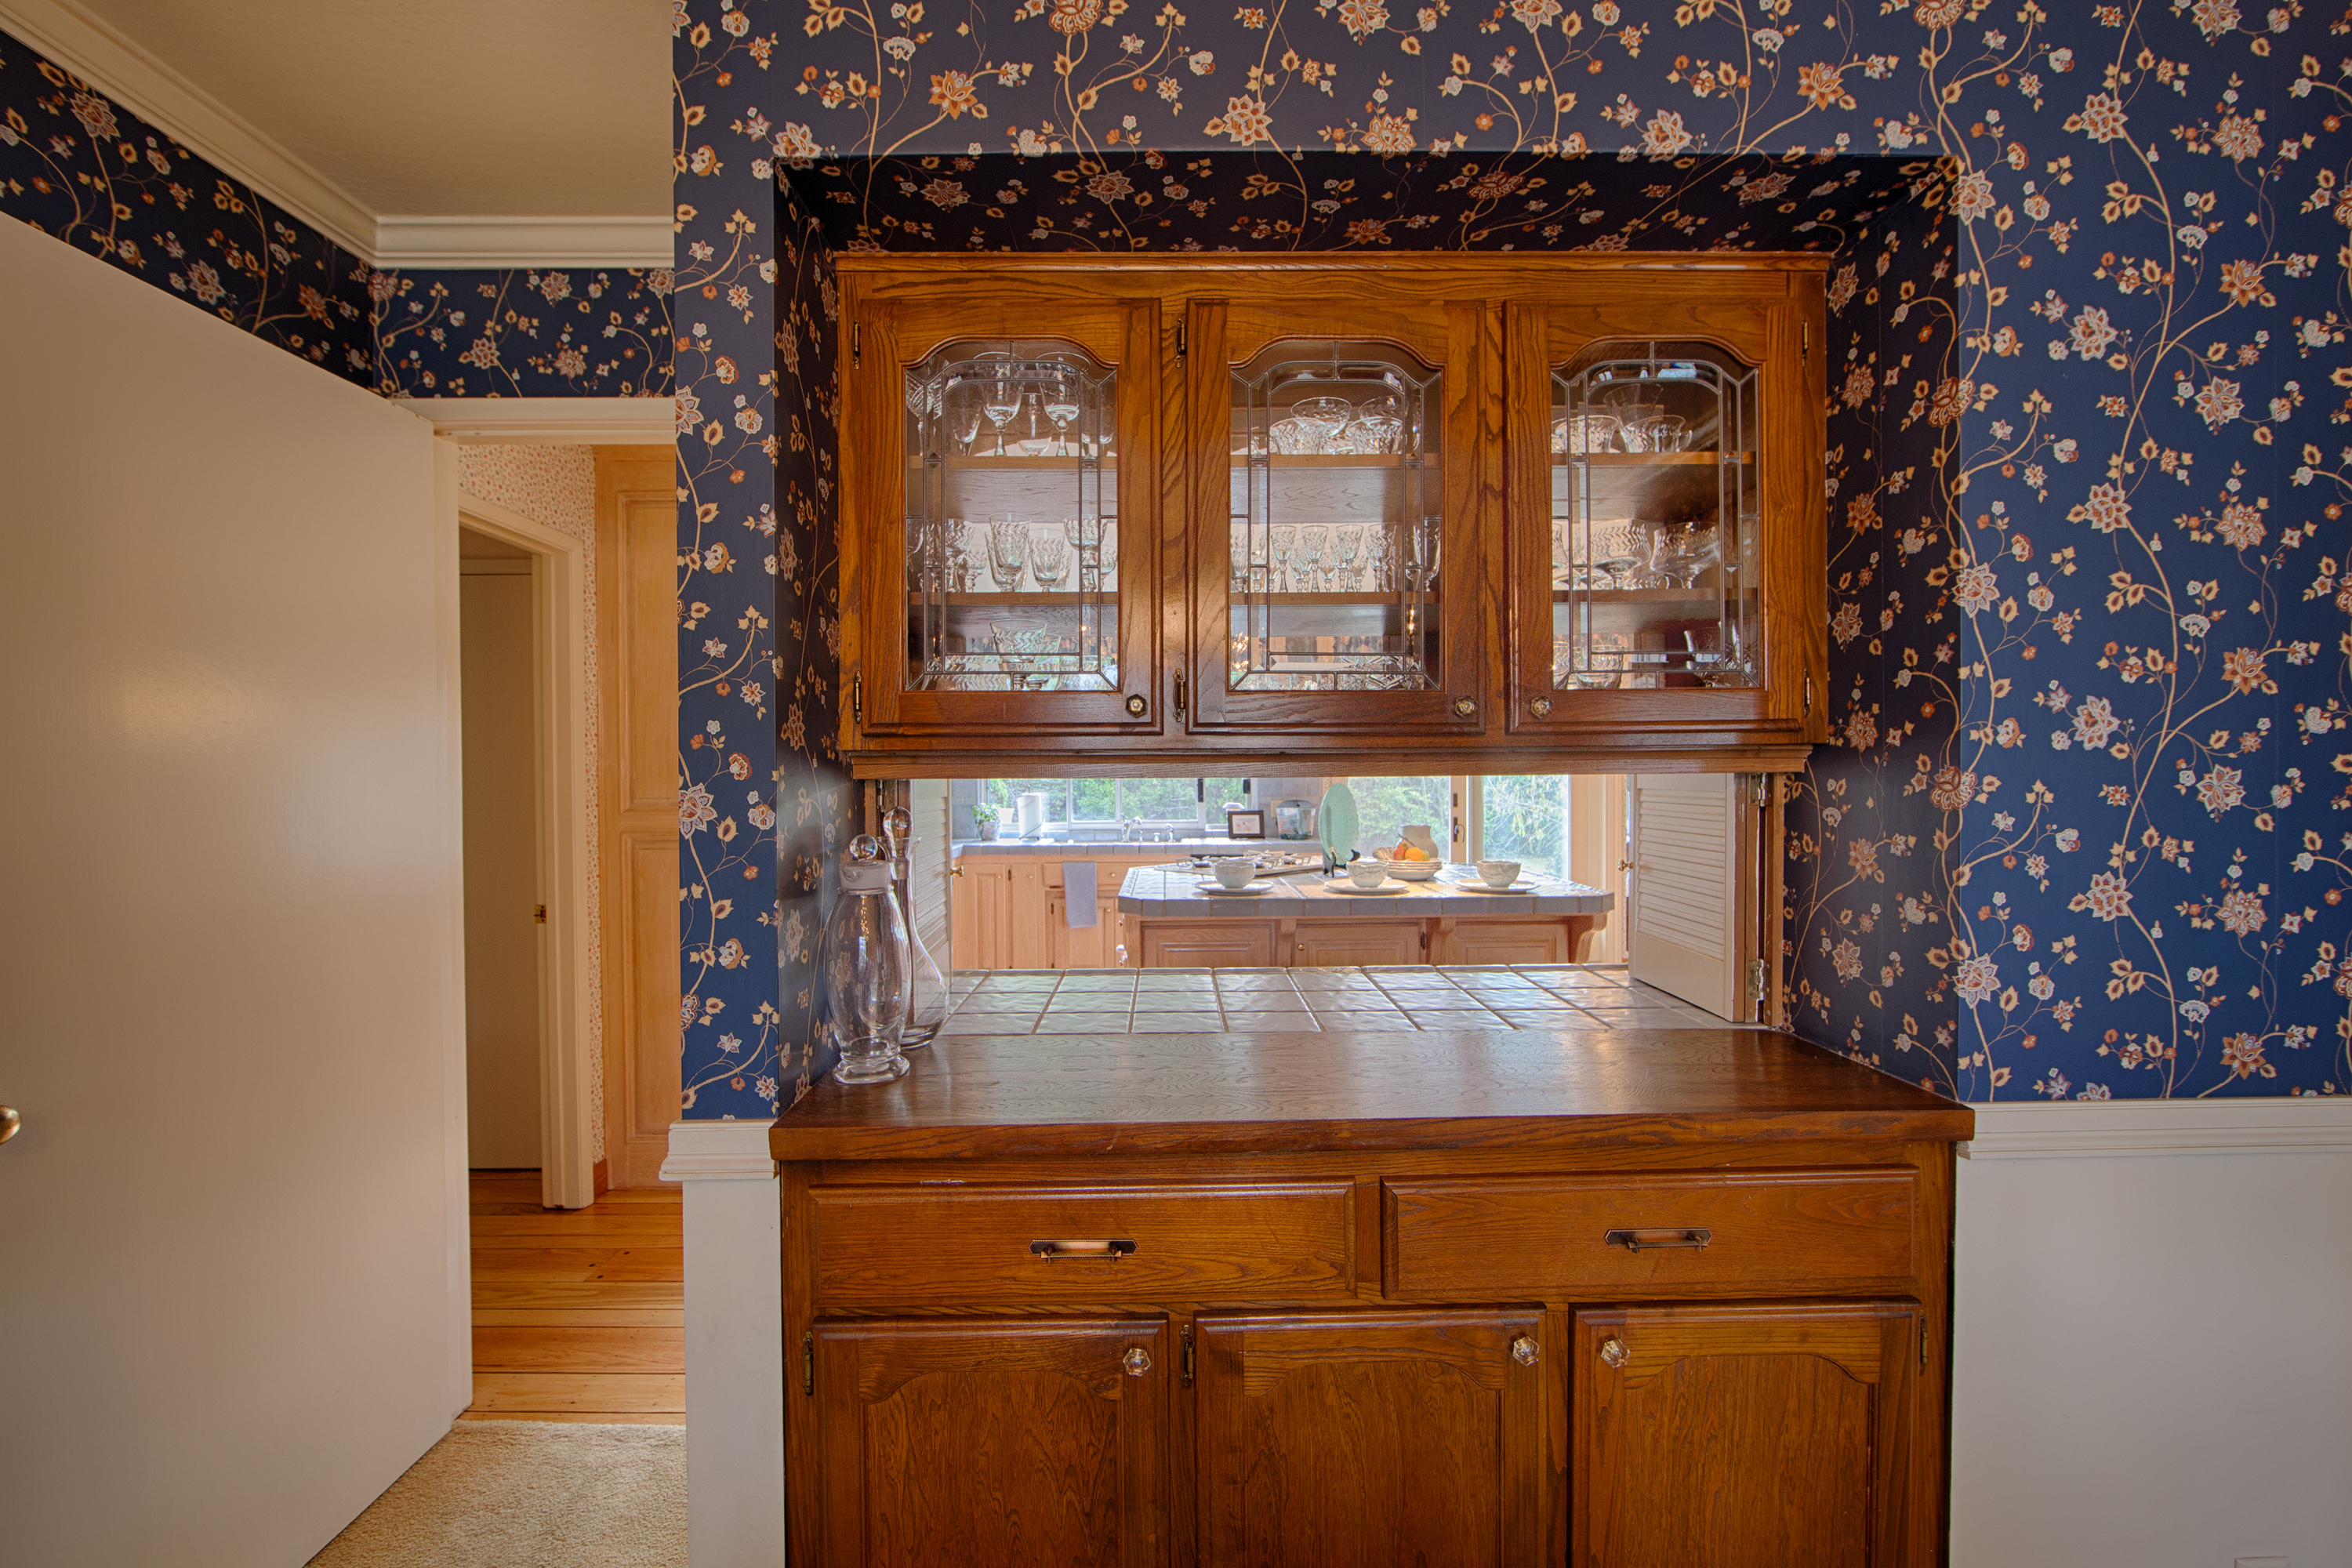 20802 Hillmoor Dr, Saratoga 95070 - Dining Room Cabinet (A)